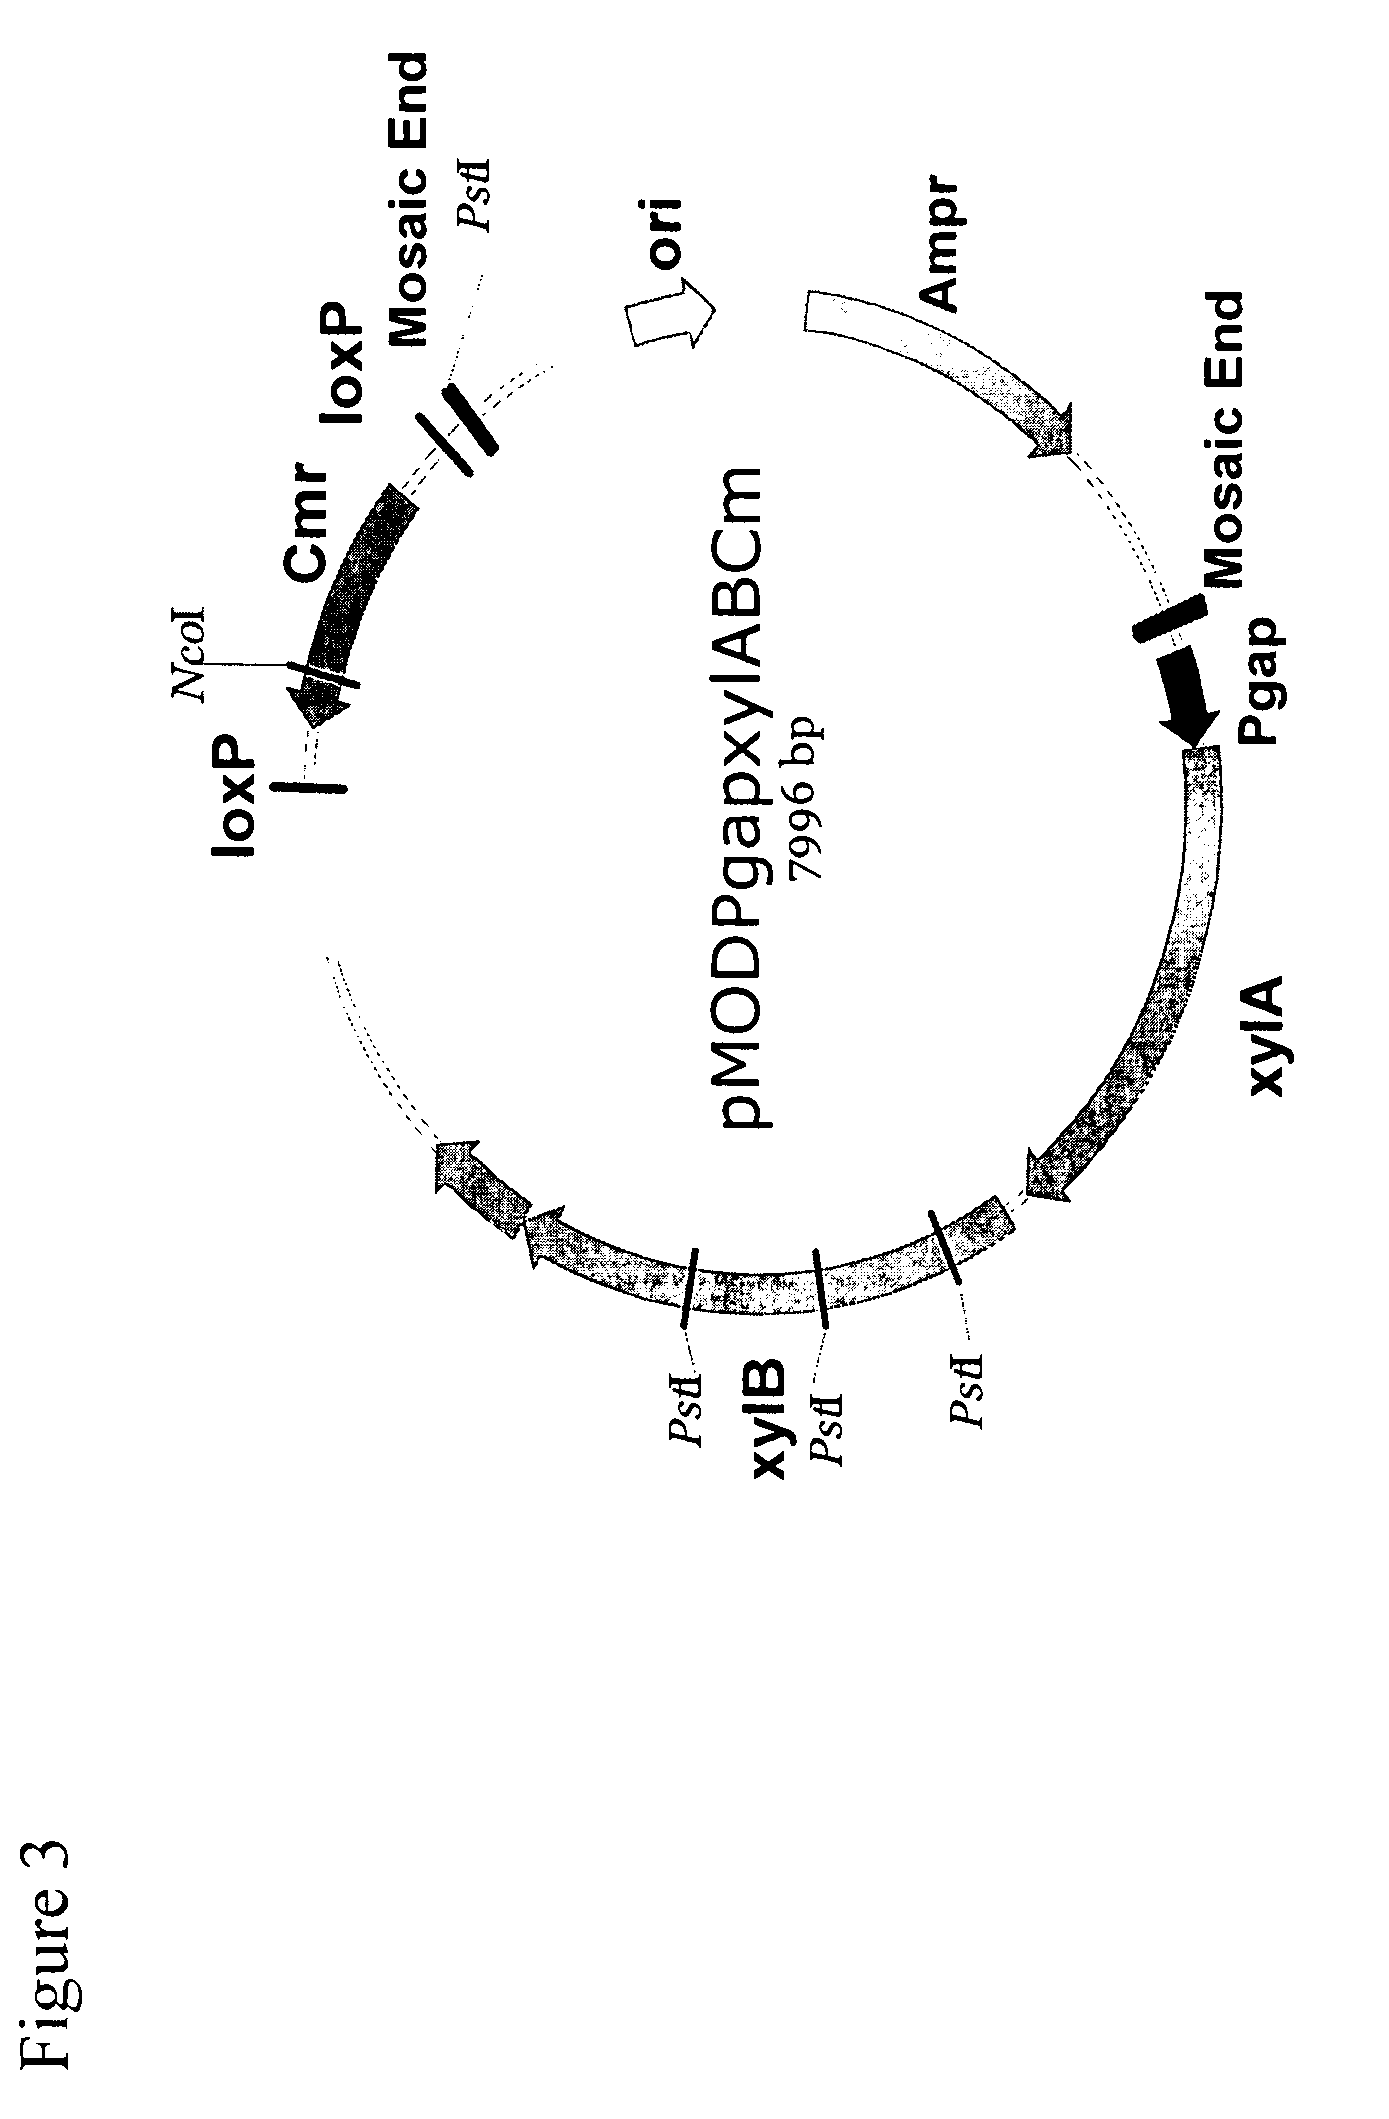 Ethanol production in fermentation of mixed sugars containing xylose